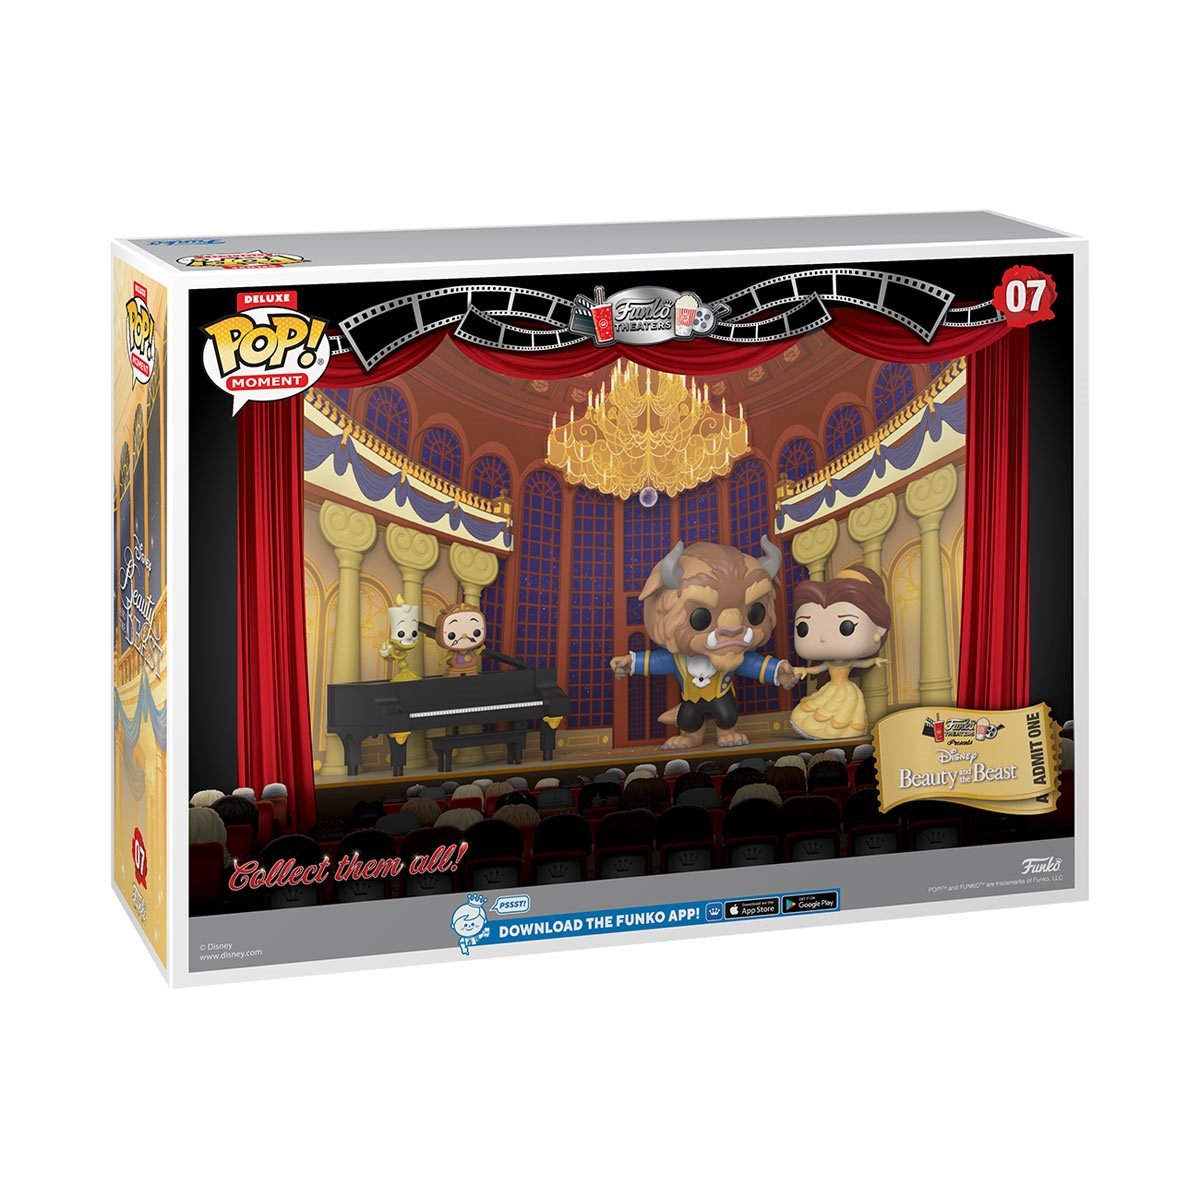 Pas op inch Evenement Beauty and the Beast Tale as Old as Time Deluxe Funko Pop! Vinyl Moment #07